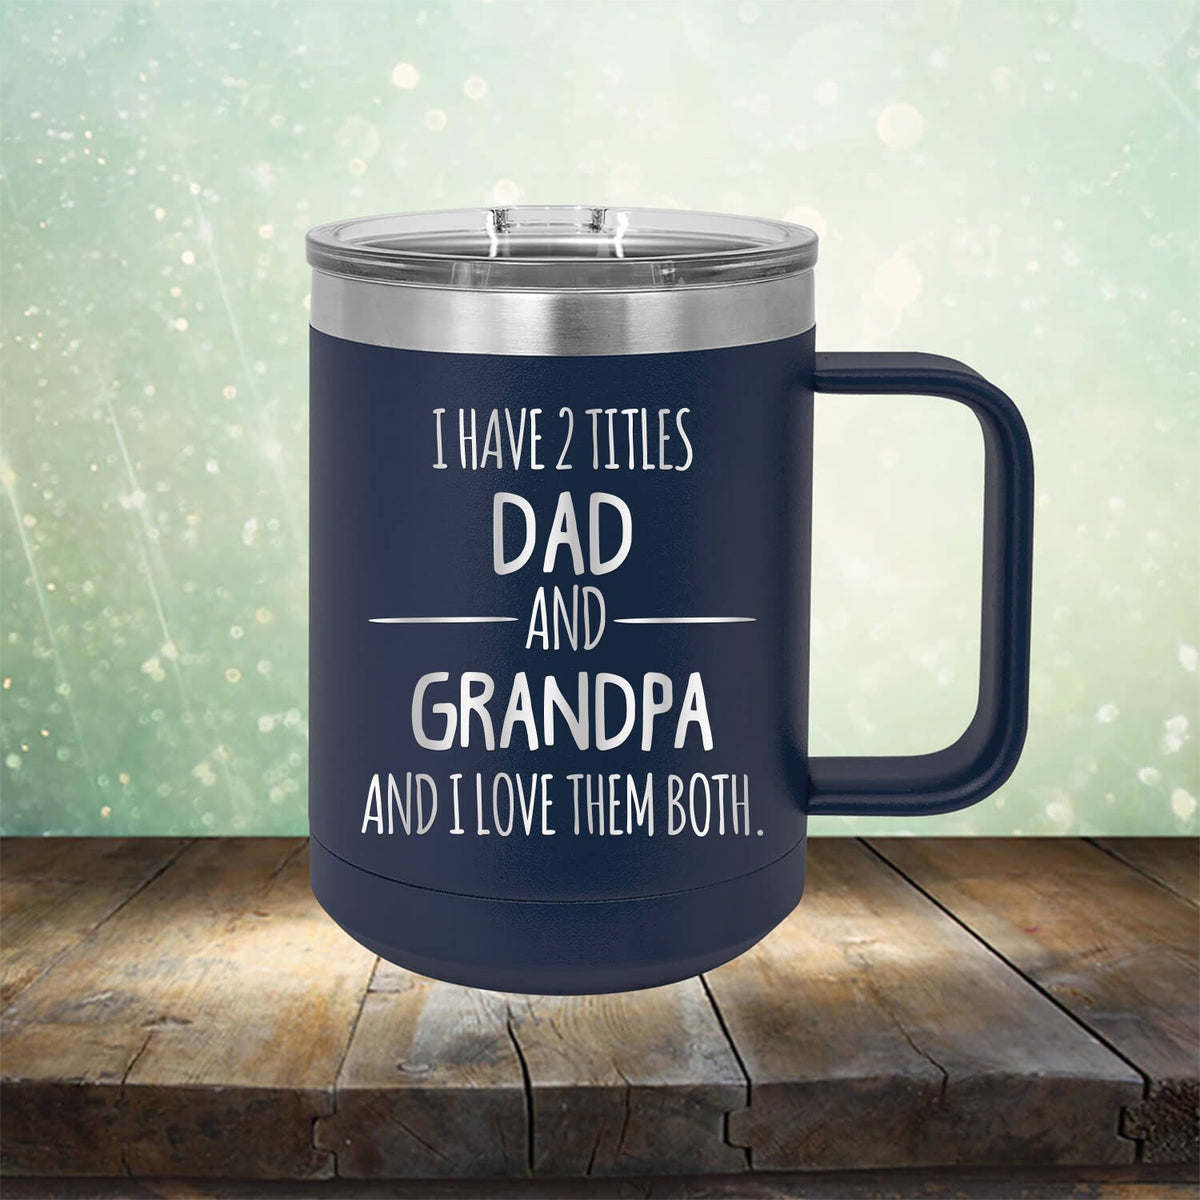 I Have 2 Titles Dad and Grandpa and I Love Them Both